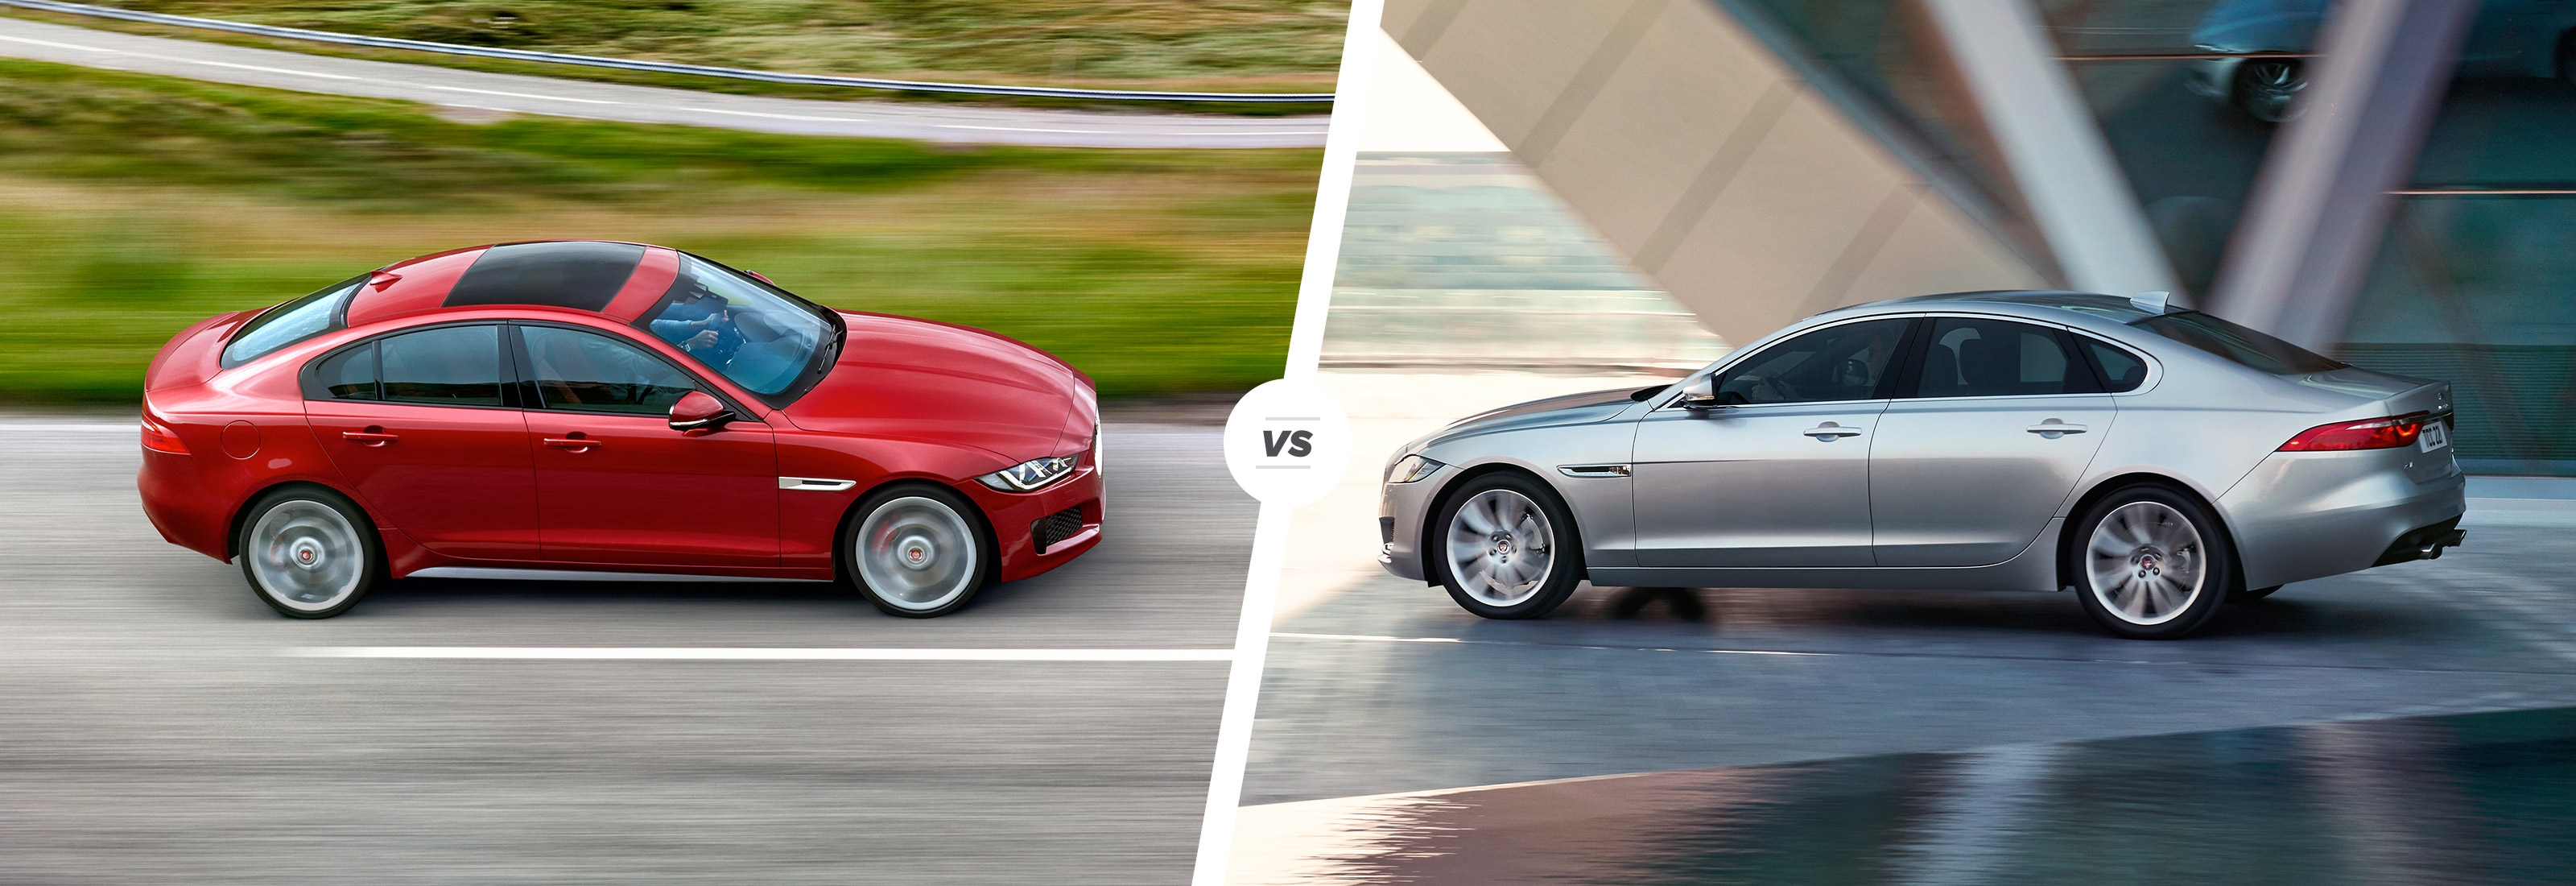 difference between jaguar xf and xe